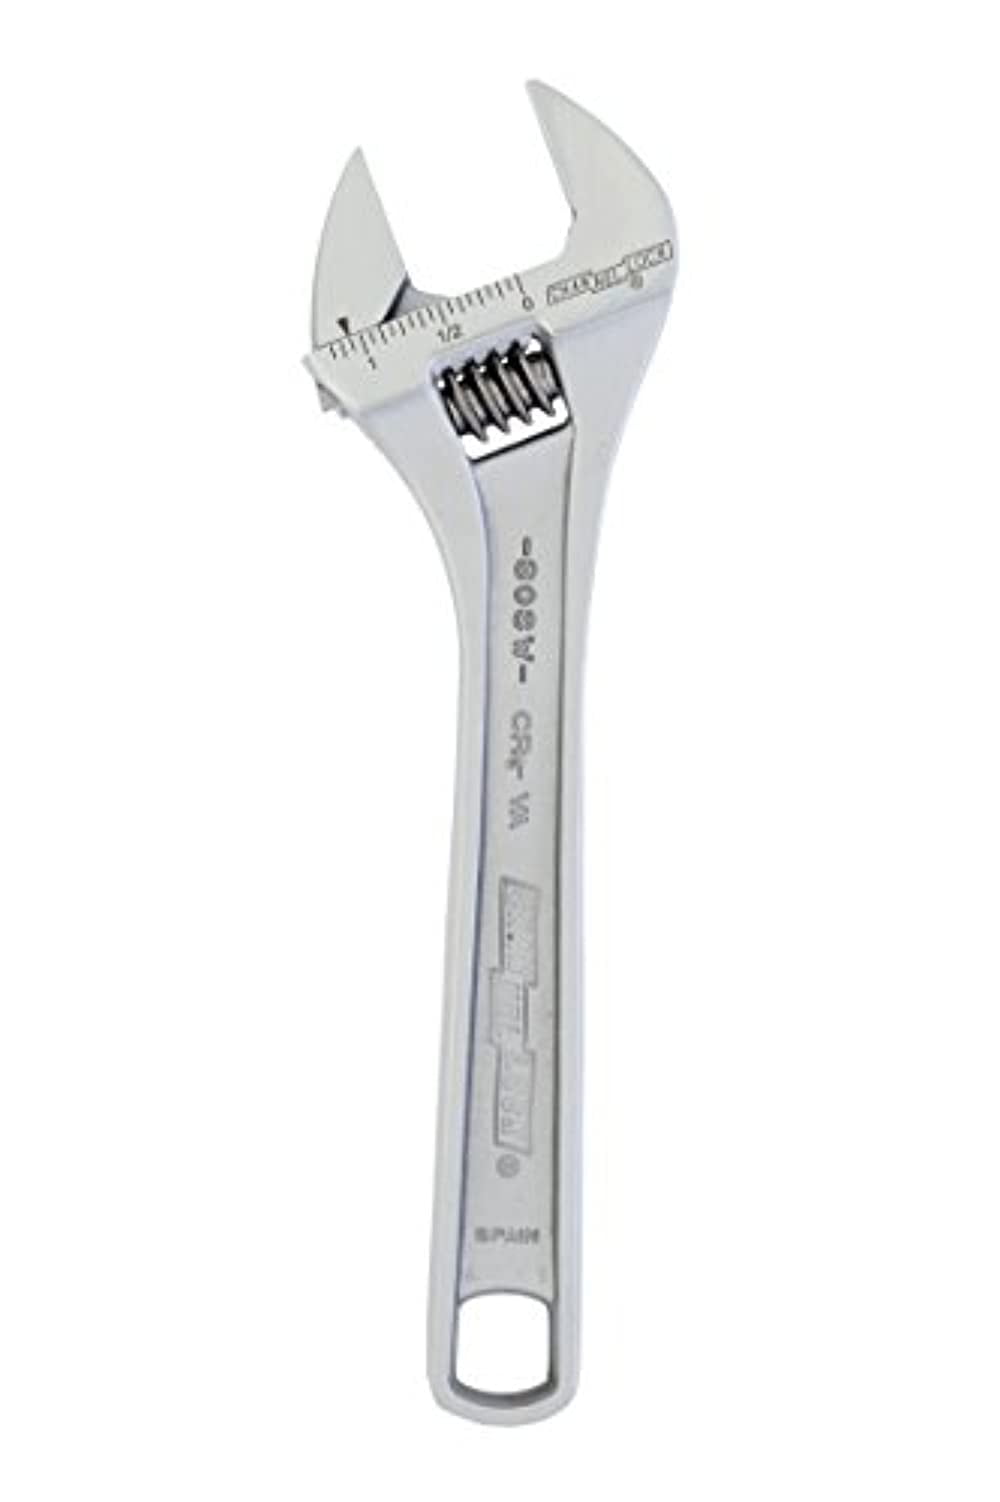 8-Inch Graintex AW1848 Professional Adjustable Wrench